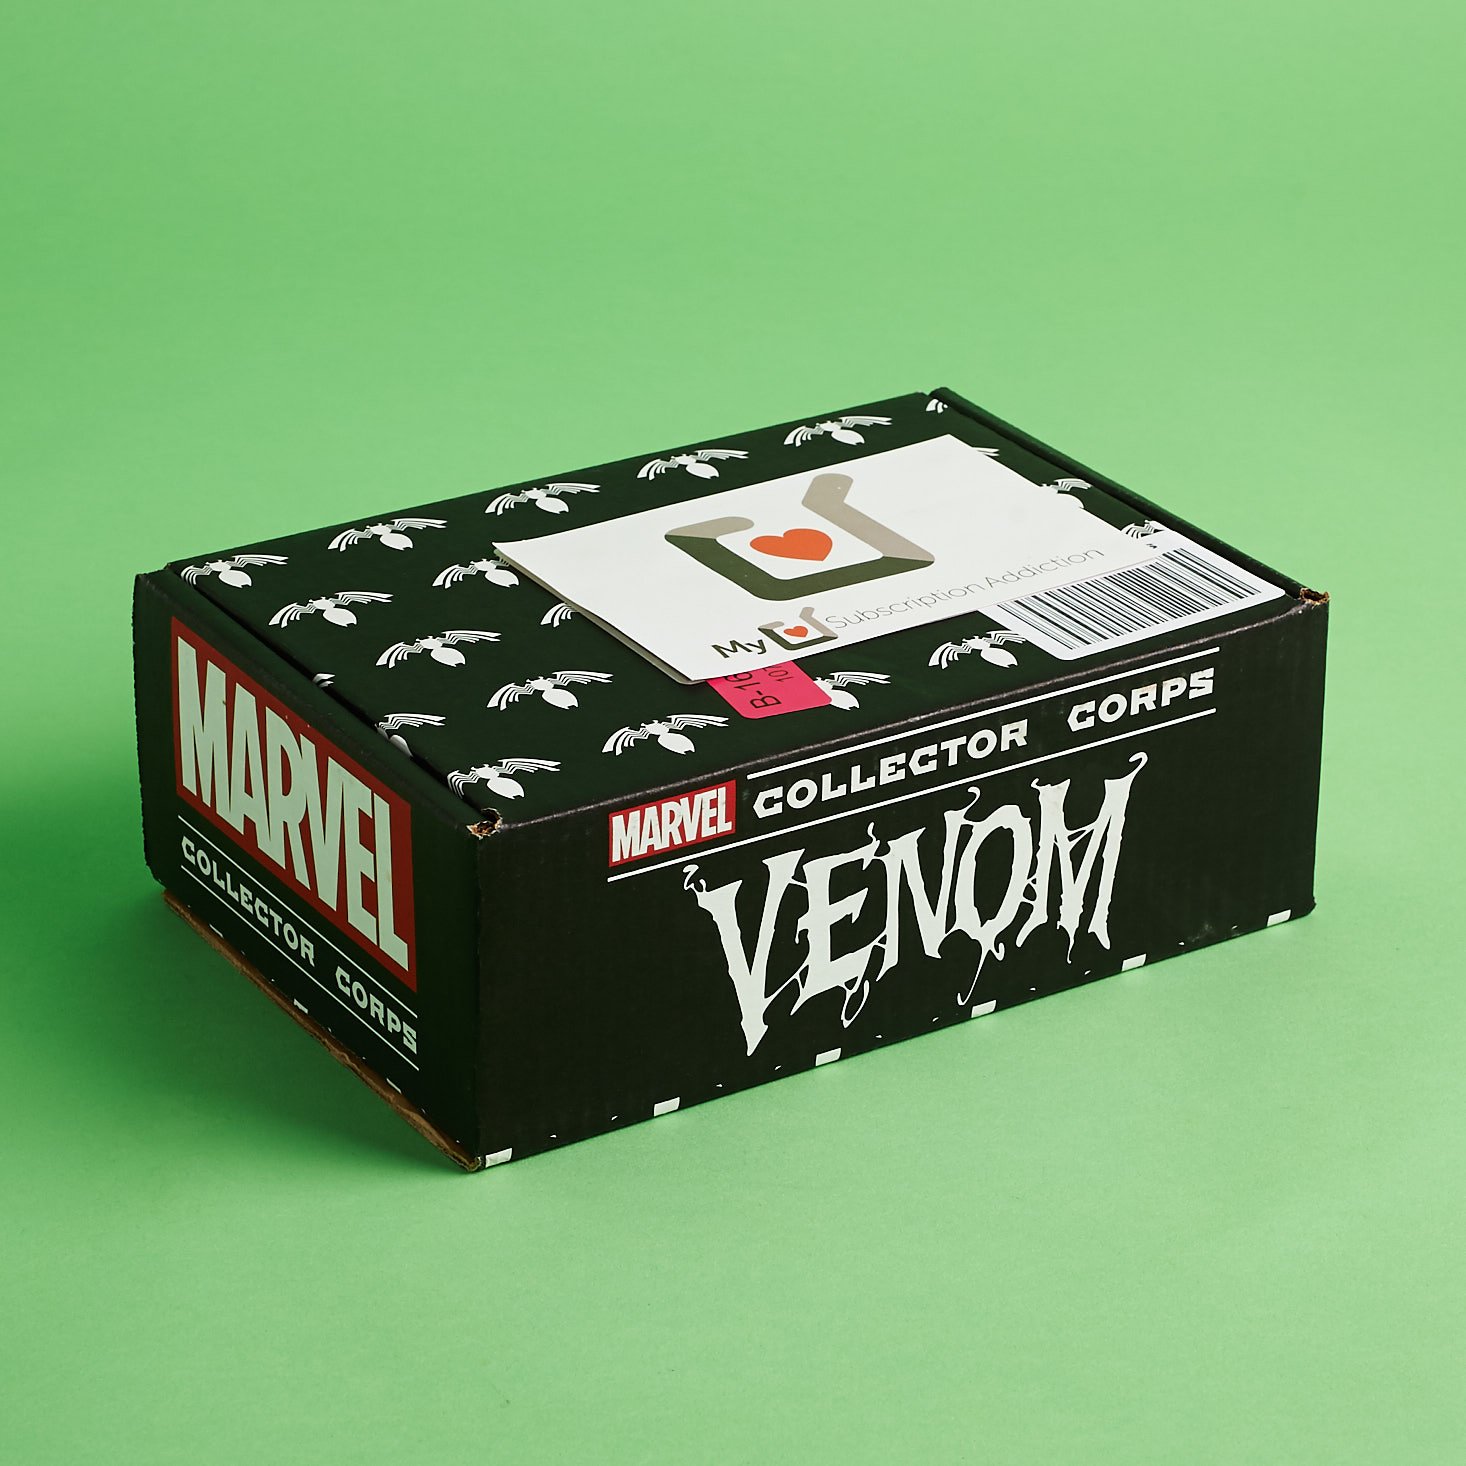 Marvel Collector Corps Review: Venom